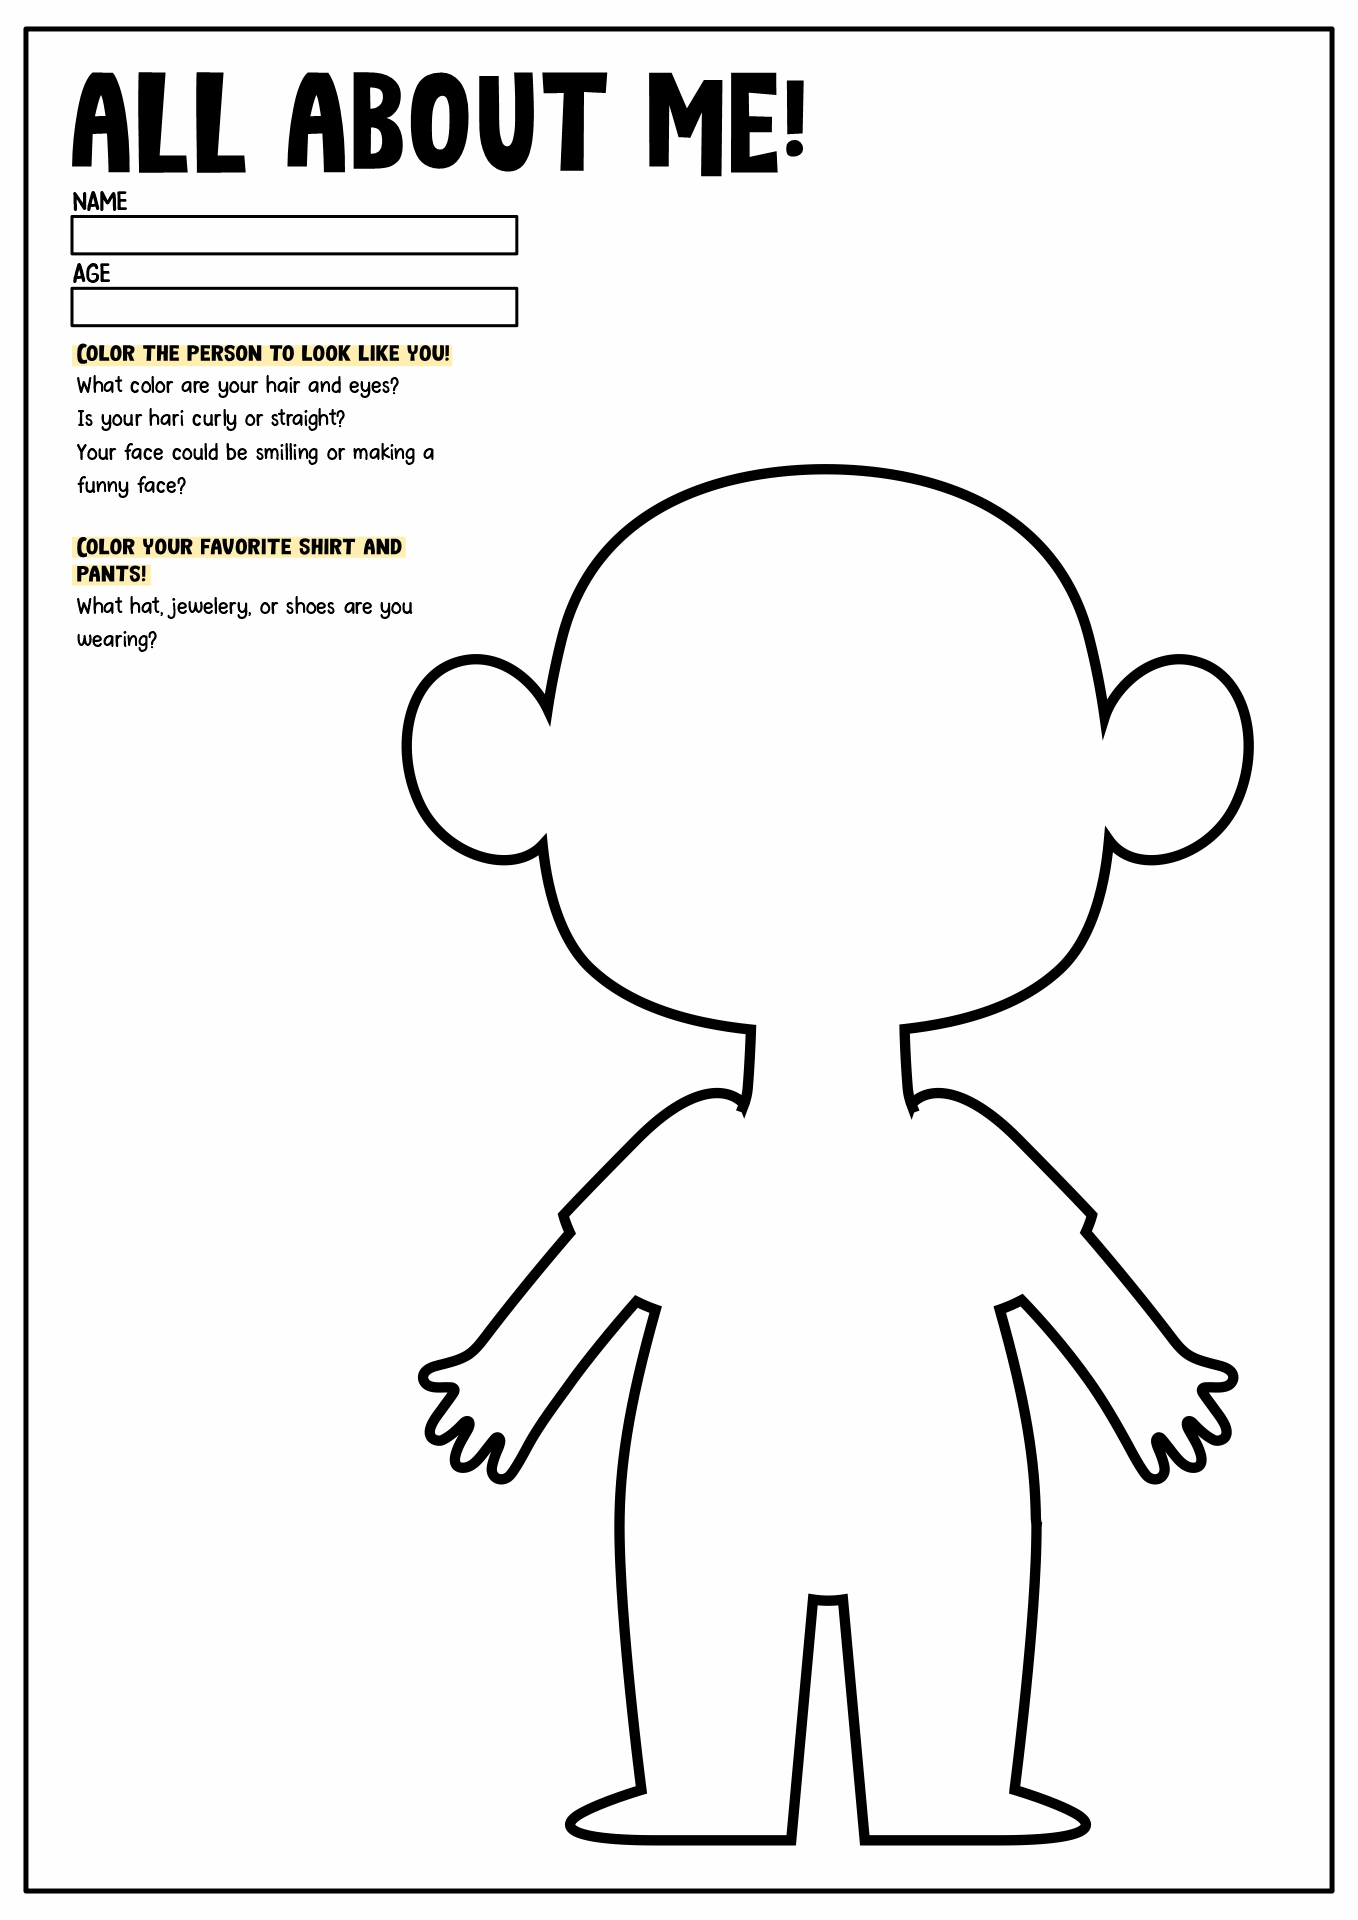 15-best-images-of-all-about-me-coloring-pages-worksheets-all-about-me